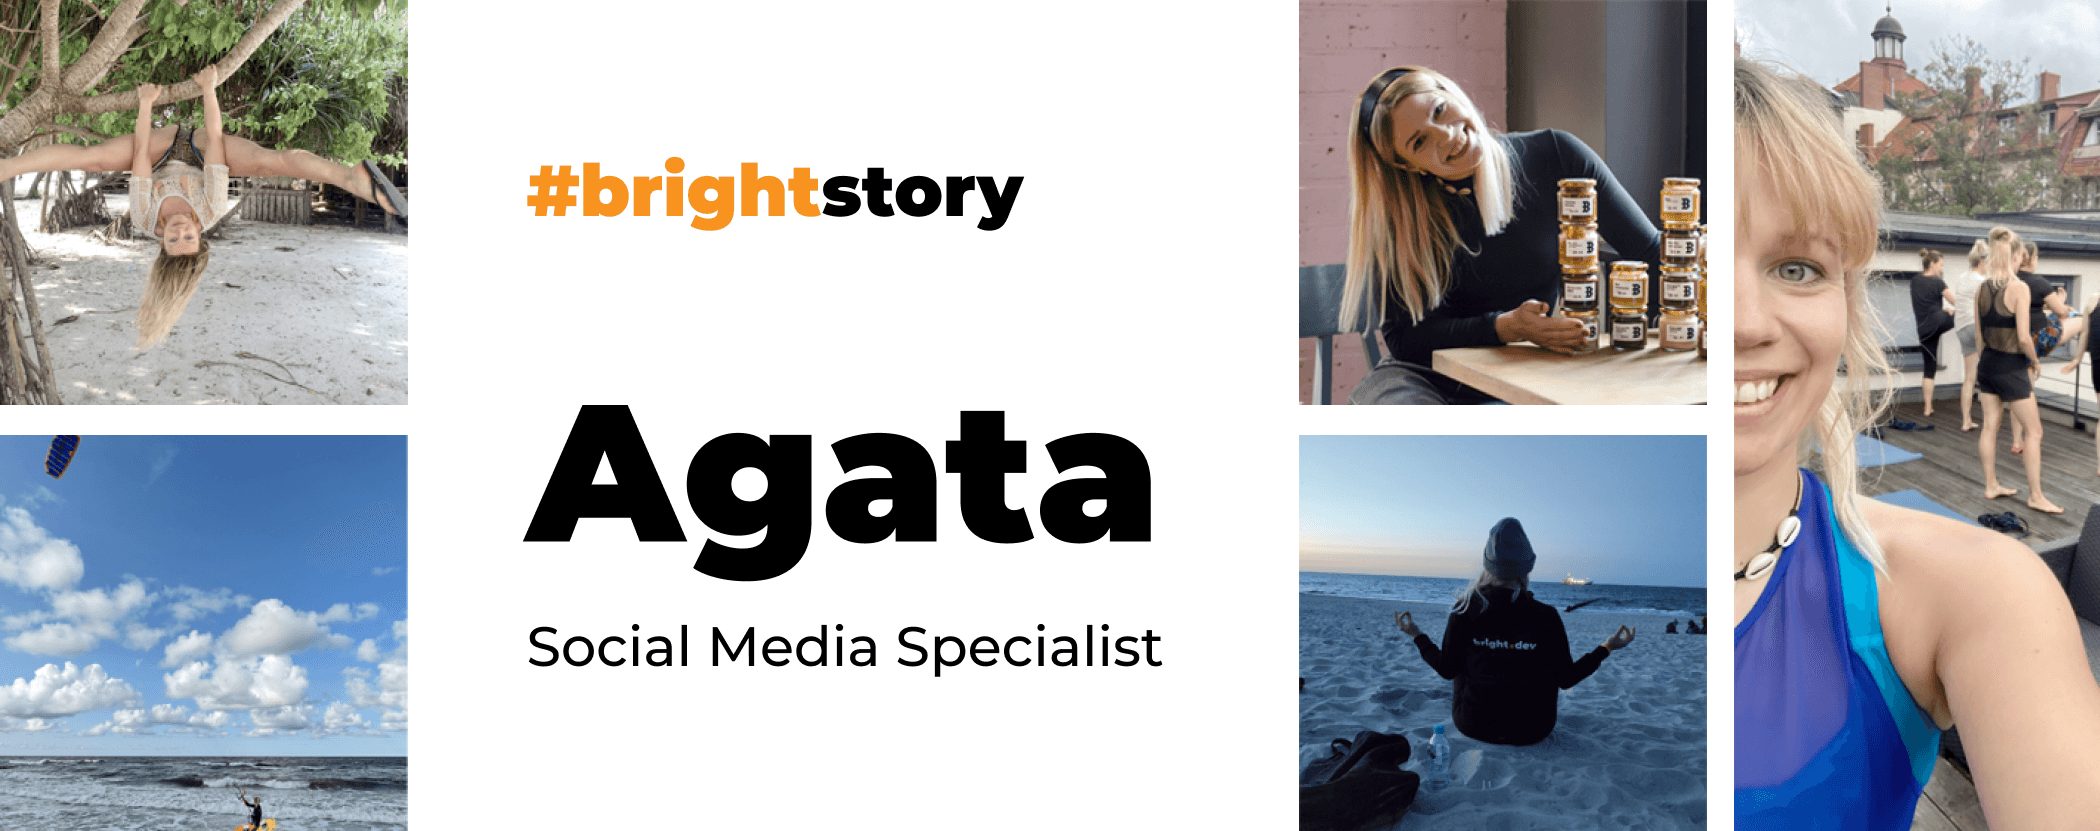 From Hostel Owner to IT Social Media Enthusiast. Meet Agata